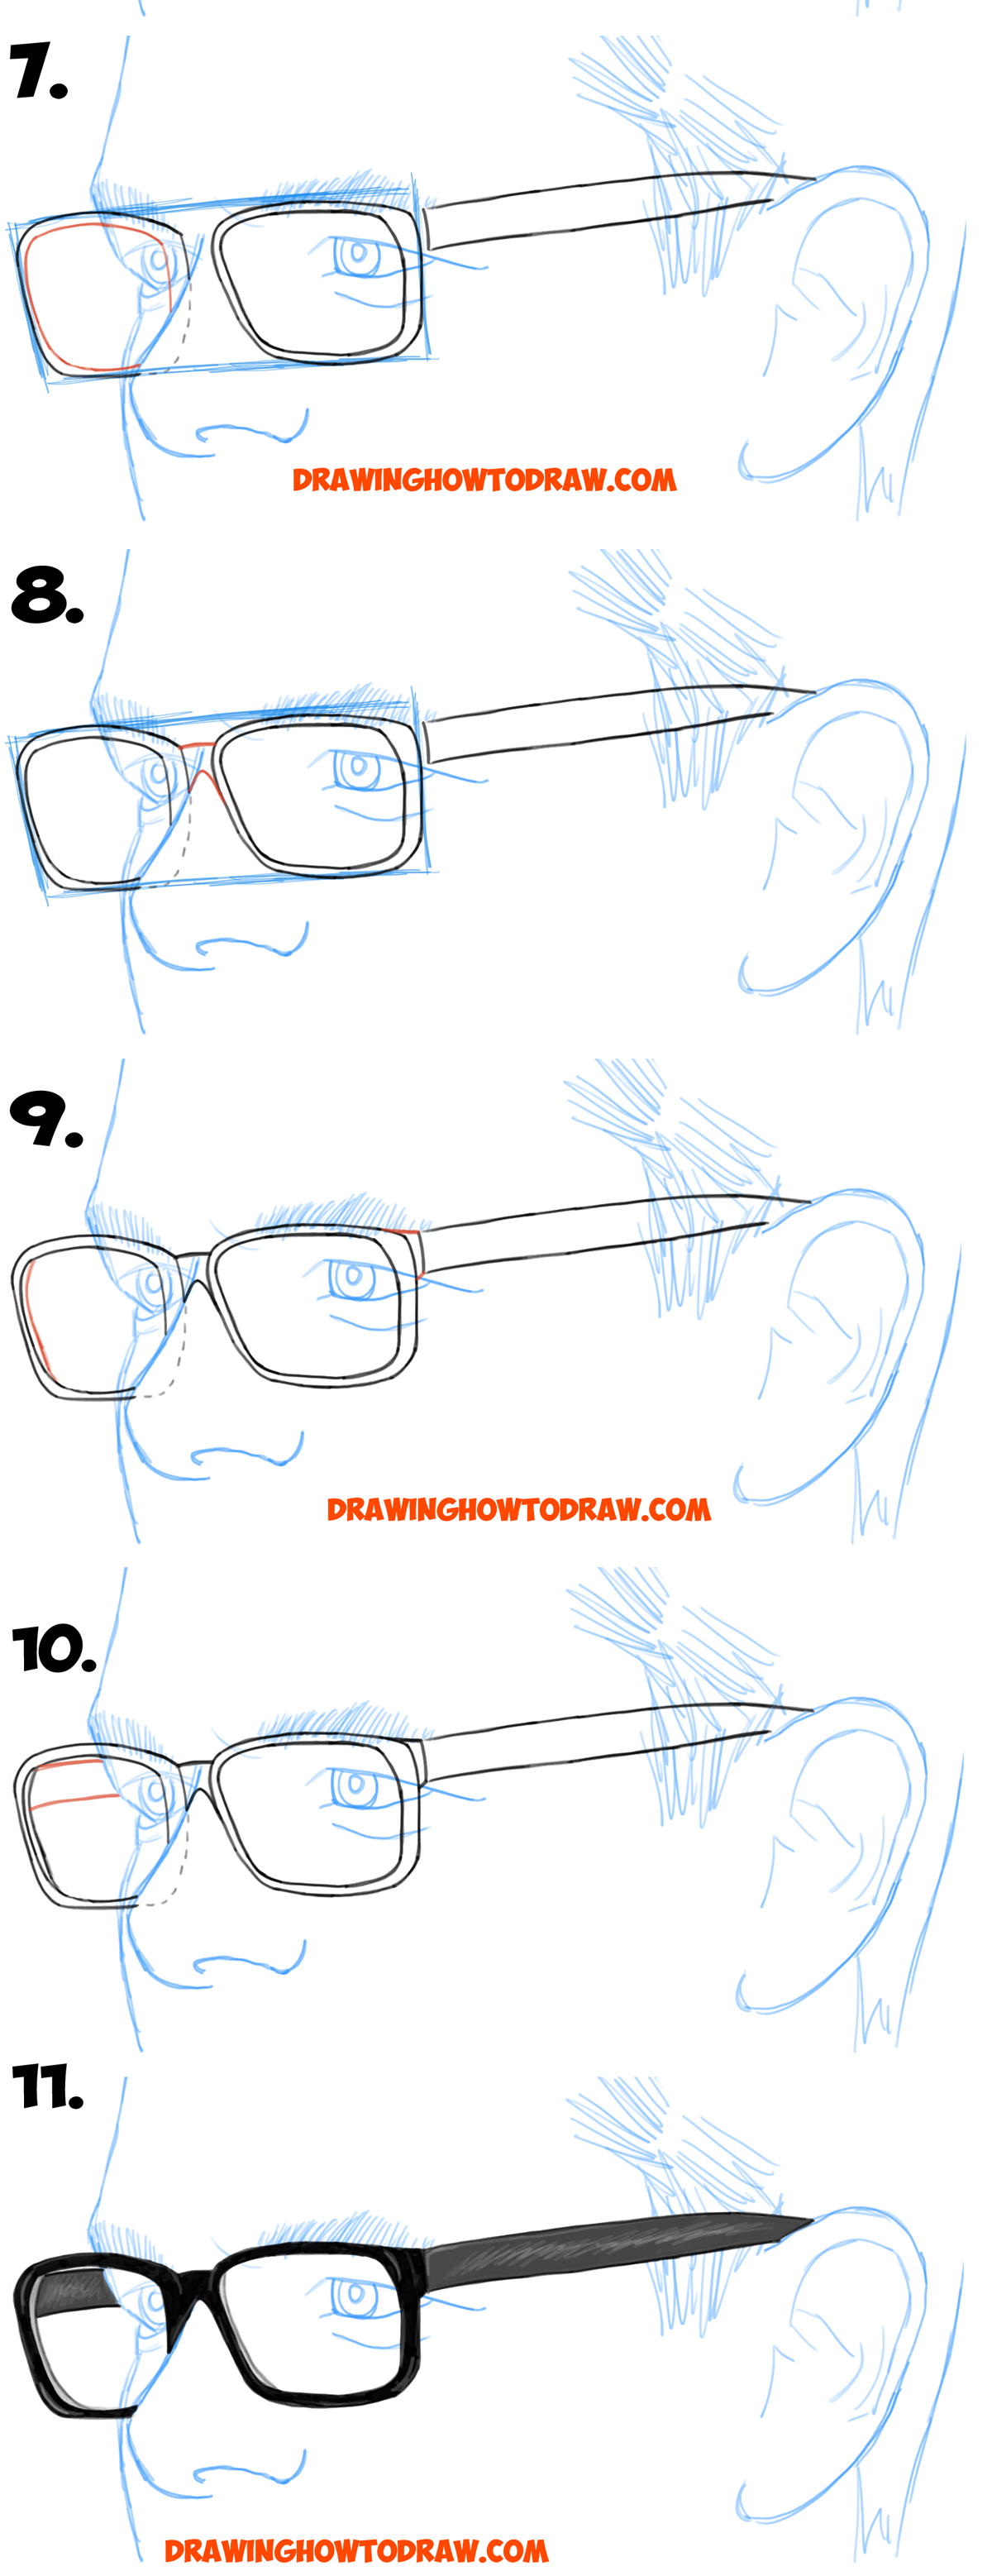 How to Draw Glasses on a Person's Face from All Angles (Side Profile